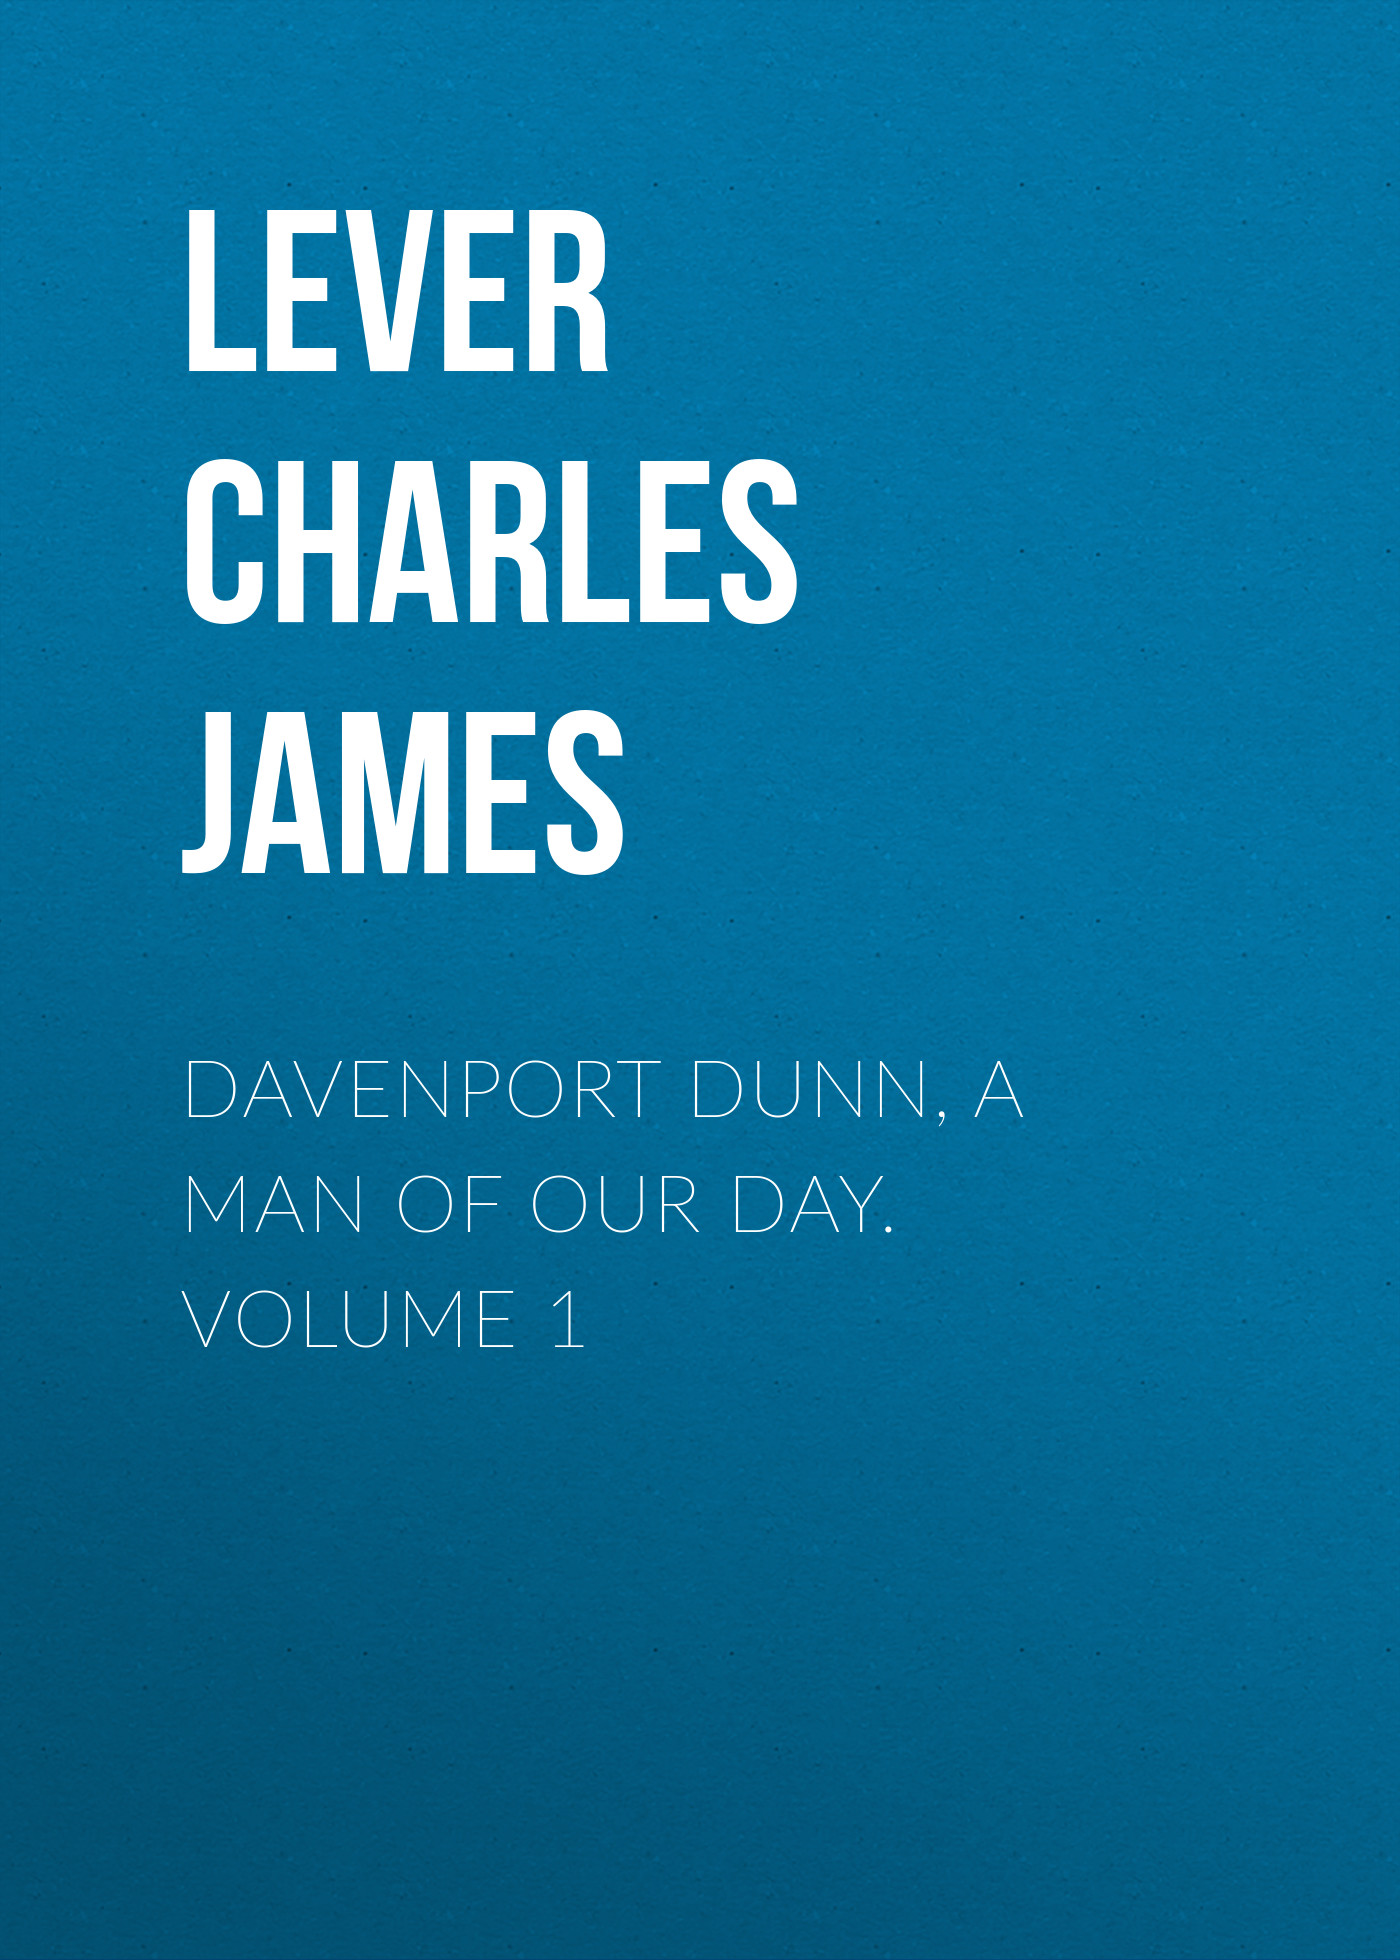 Lever Charles James Davenport Dunn, a Man of Our Day. Volume 1